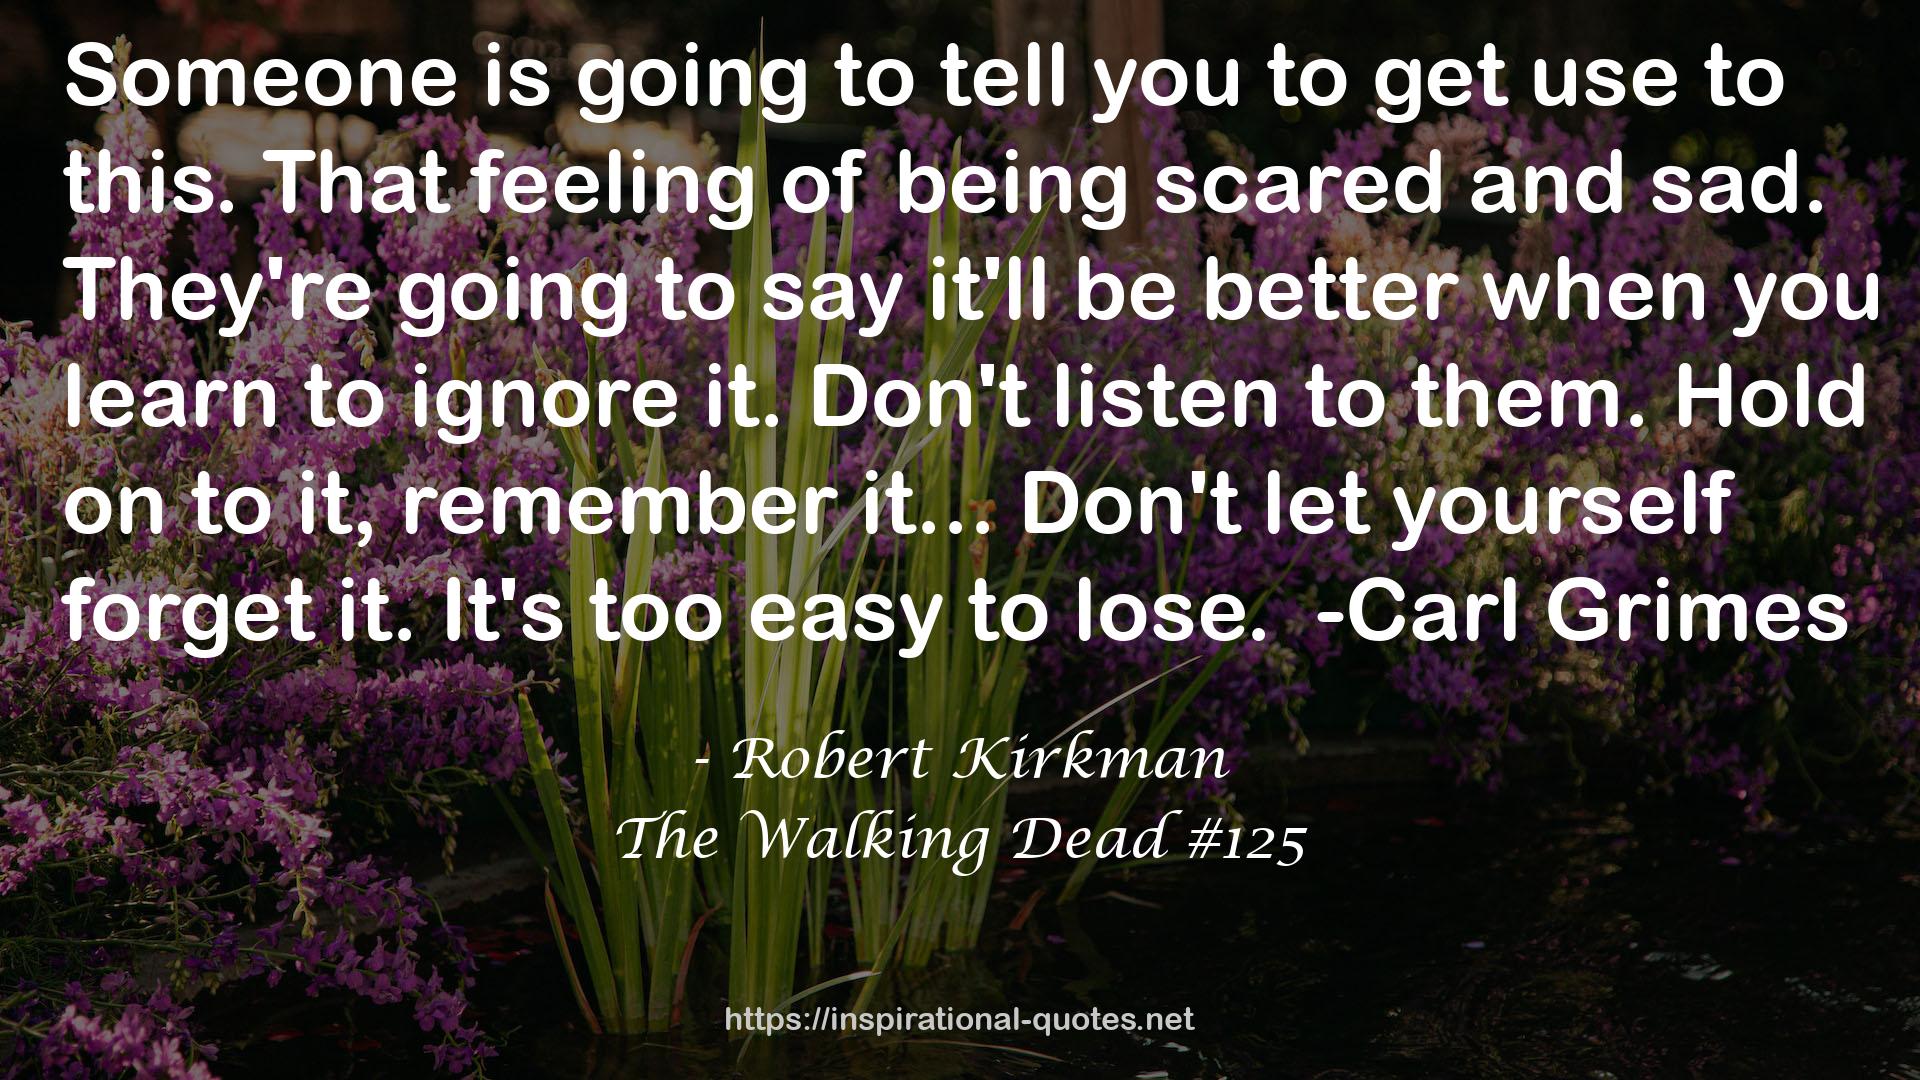 The Walking Dead #125 QUOTES